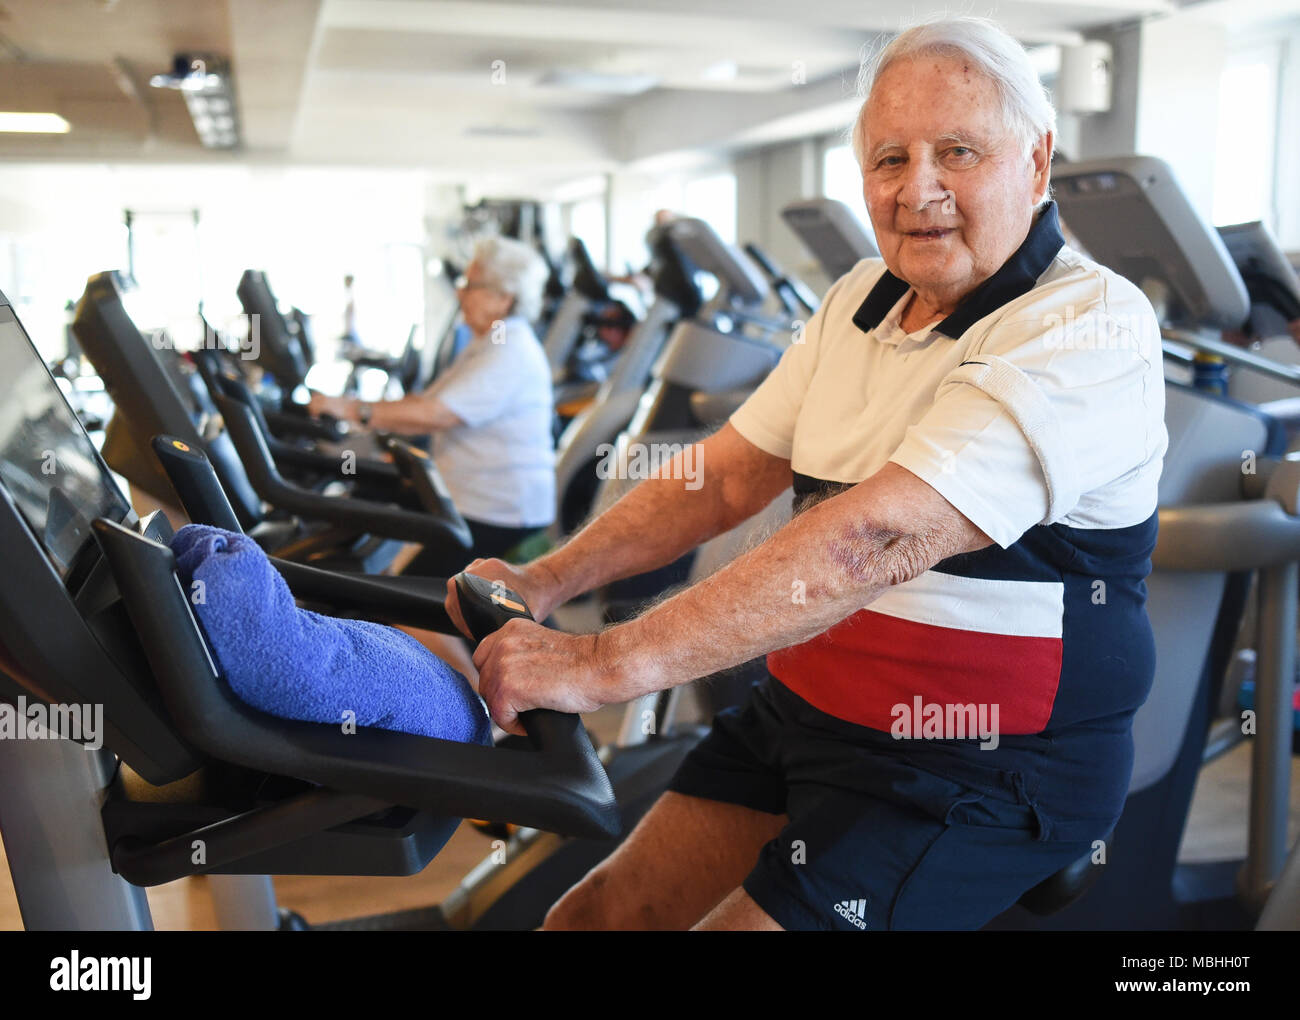 06 April 2018, Germany, Bergisch Gladbach: Helmut, 85 years old, sits on a bicycle ergometer at a gym. Photo: Henning Kaiser/dpa Stock Photo